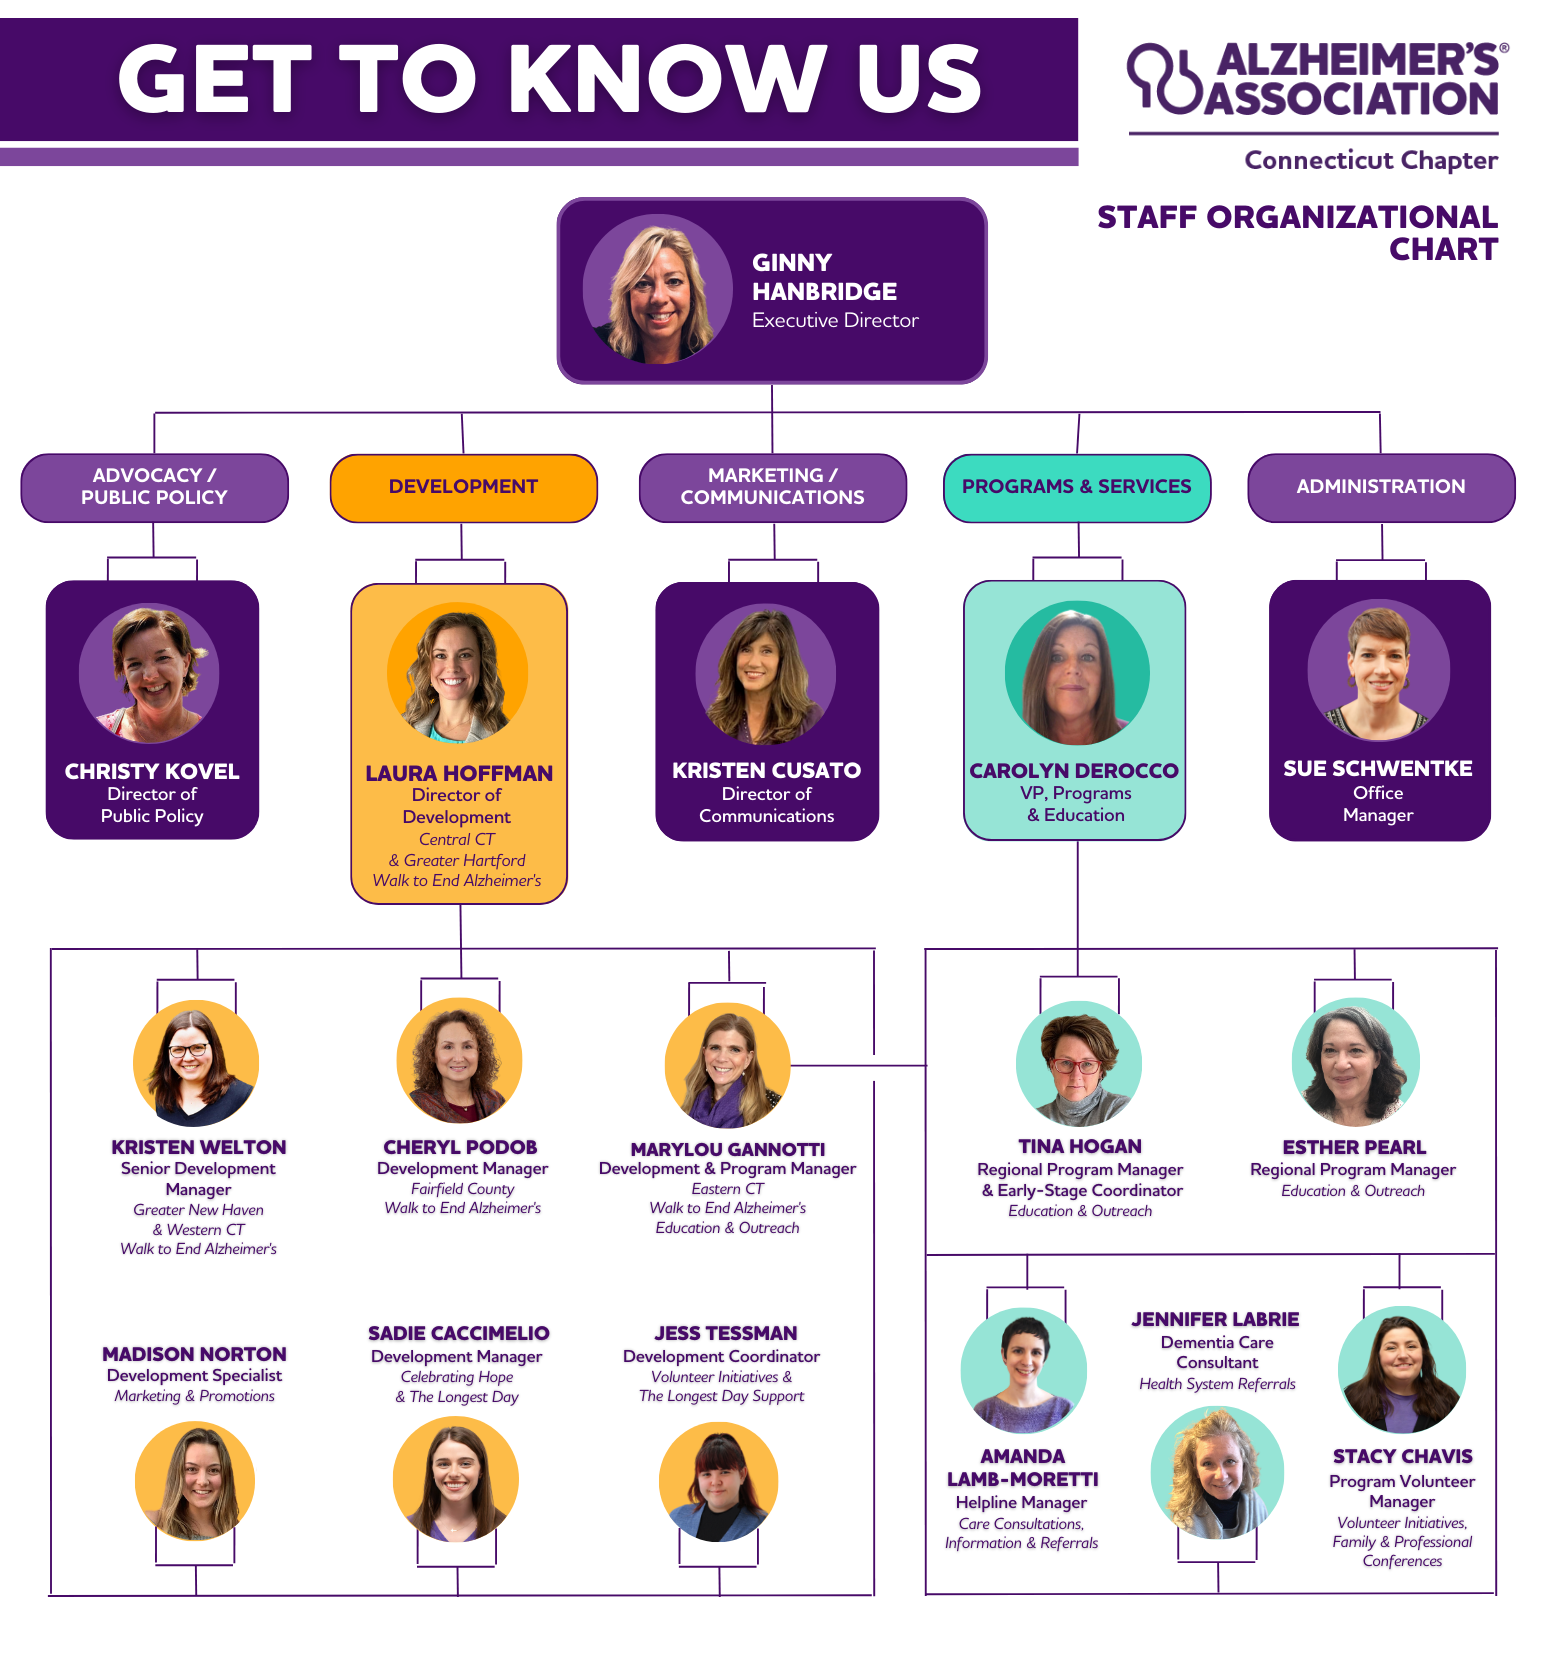 Alzheimers-Association-CT-Chapter-Org-Chart-FINAL-FY24_updated-9-1-23-no-footer-(1).png